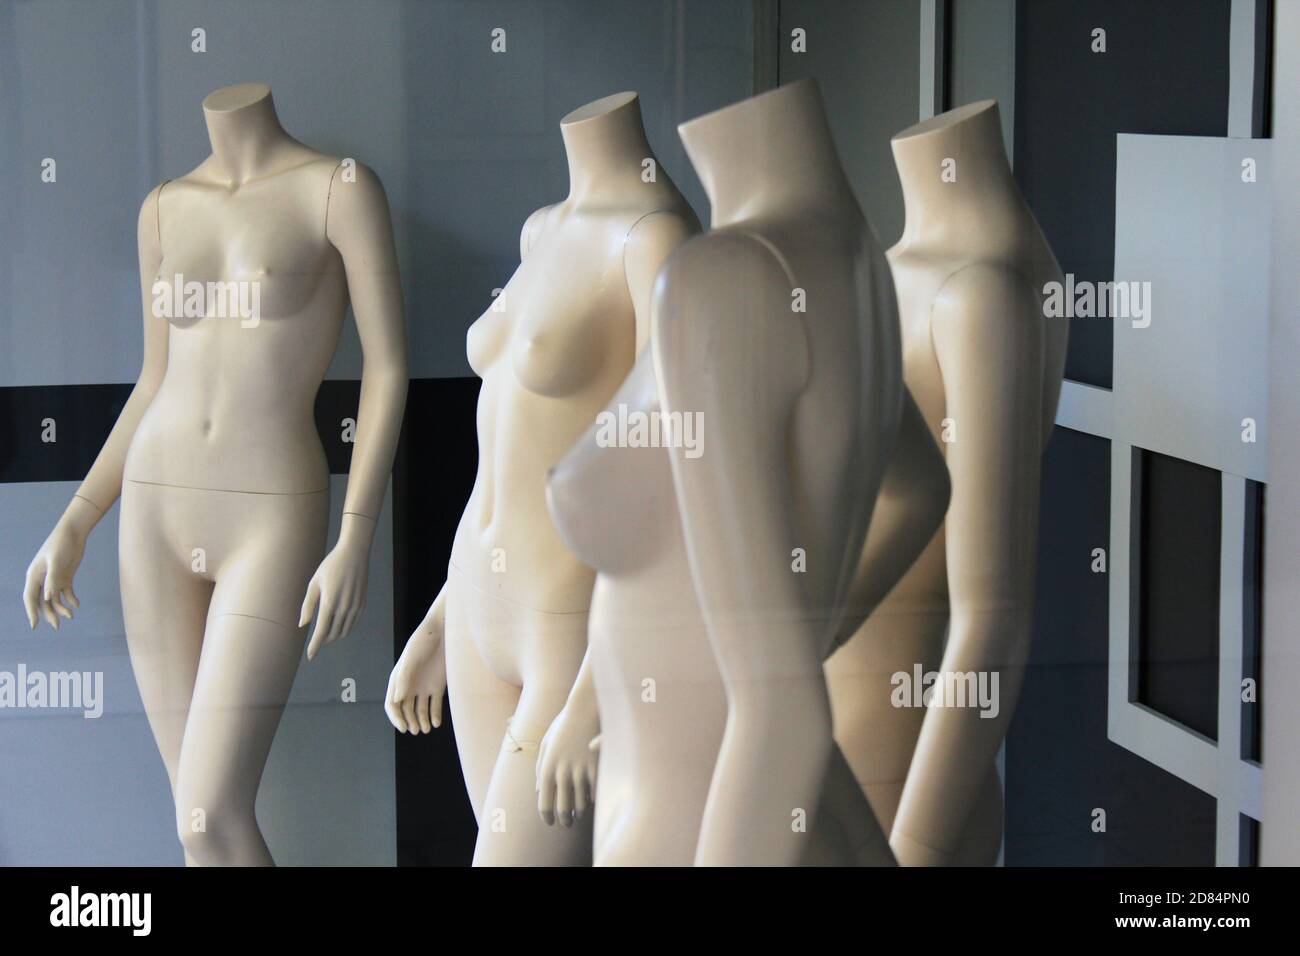 The window of empty clothing store in the commercial center of Athens, with mannequin dolls in the display - Athens, Greece, October 9 2020. Stock Photo